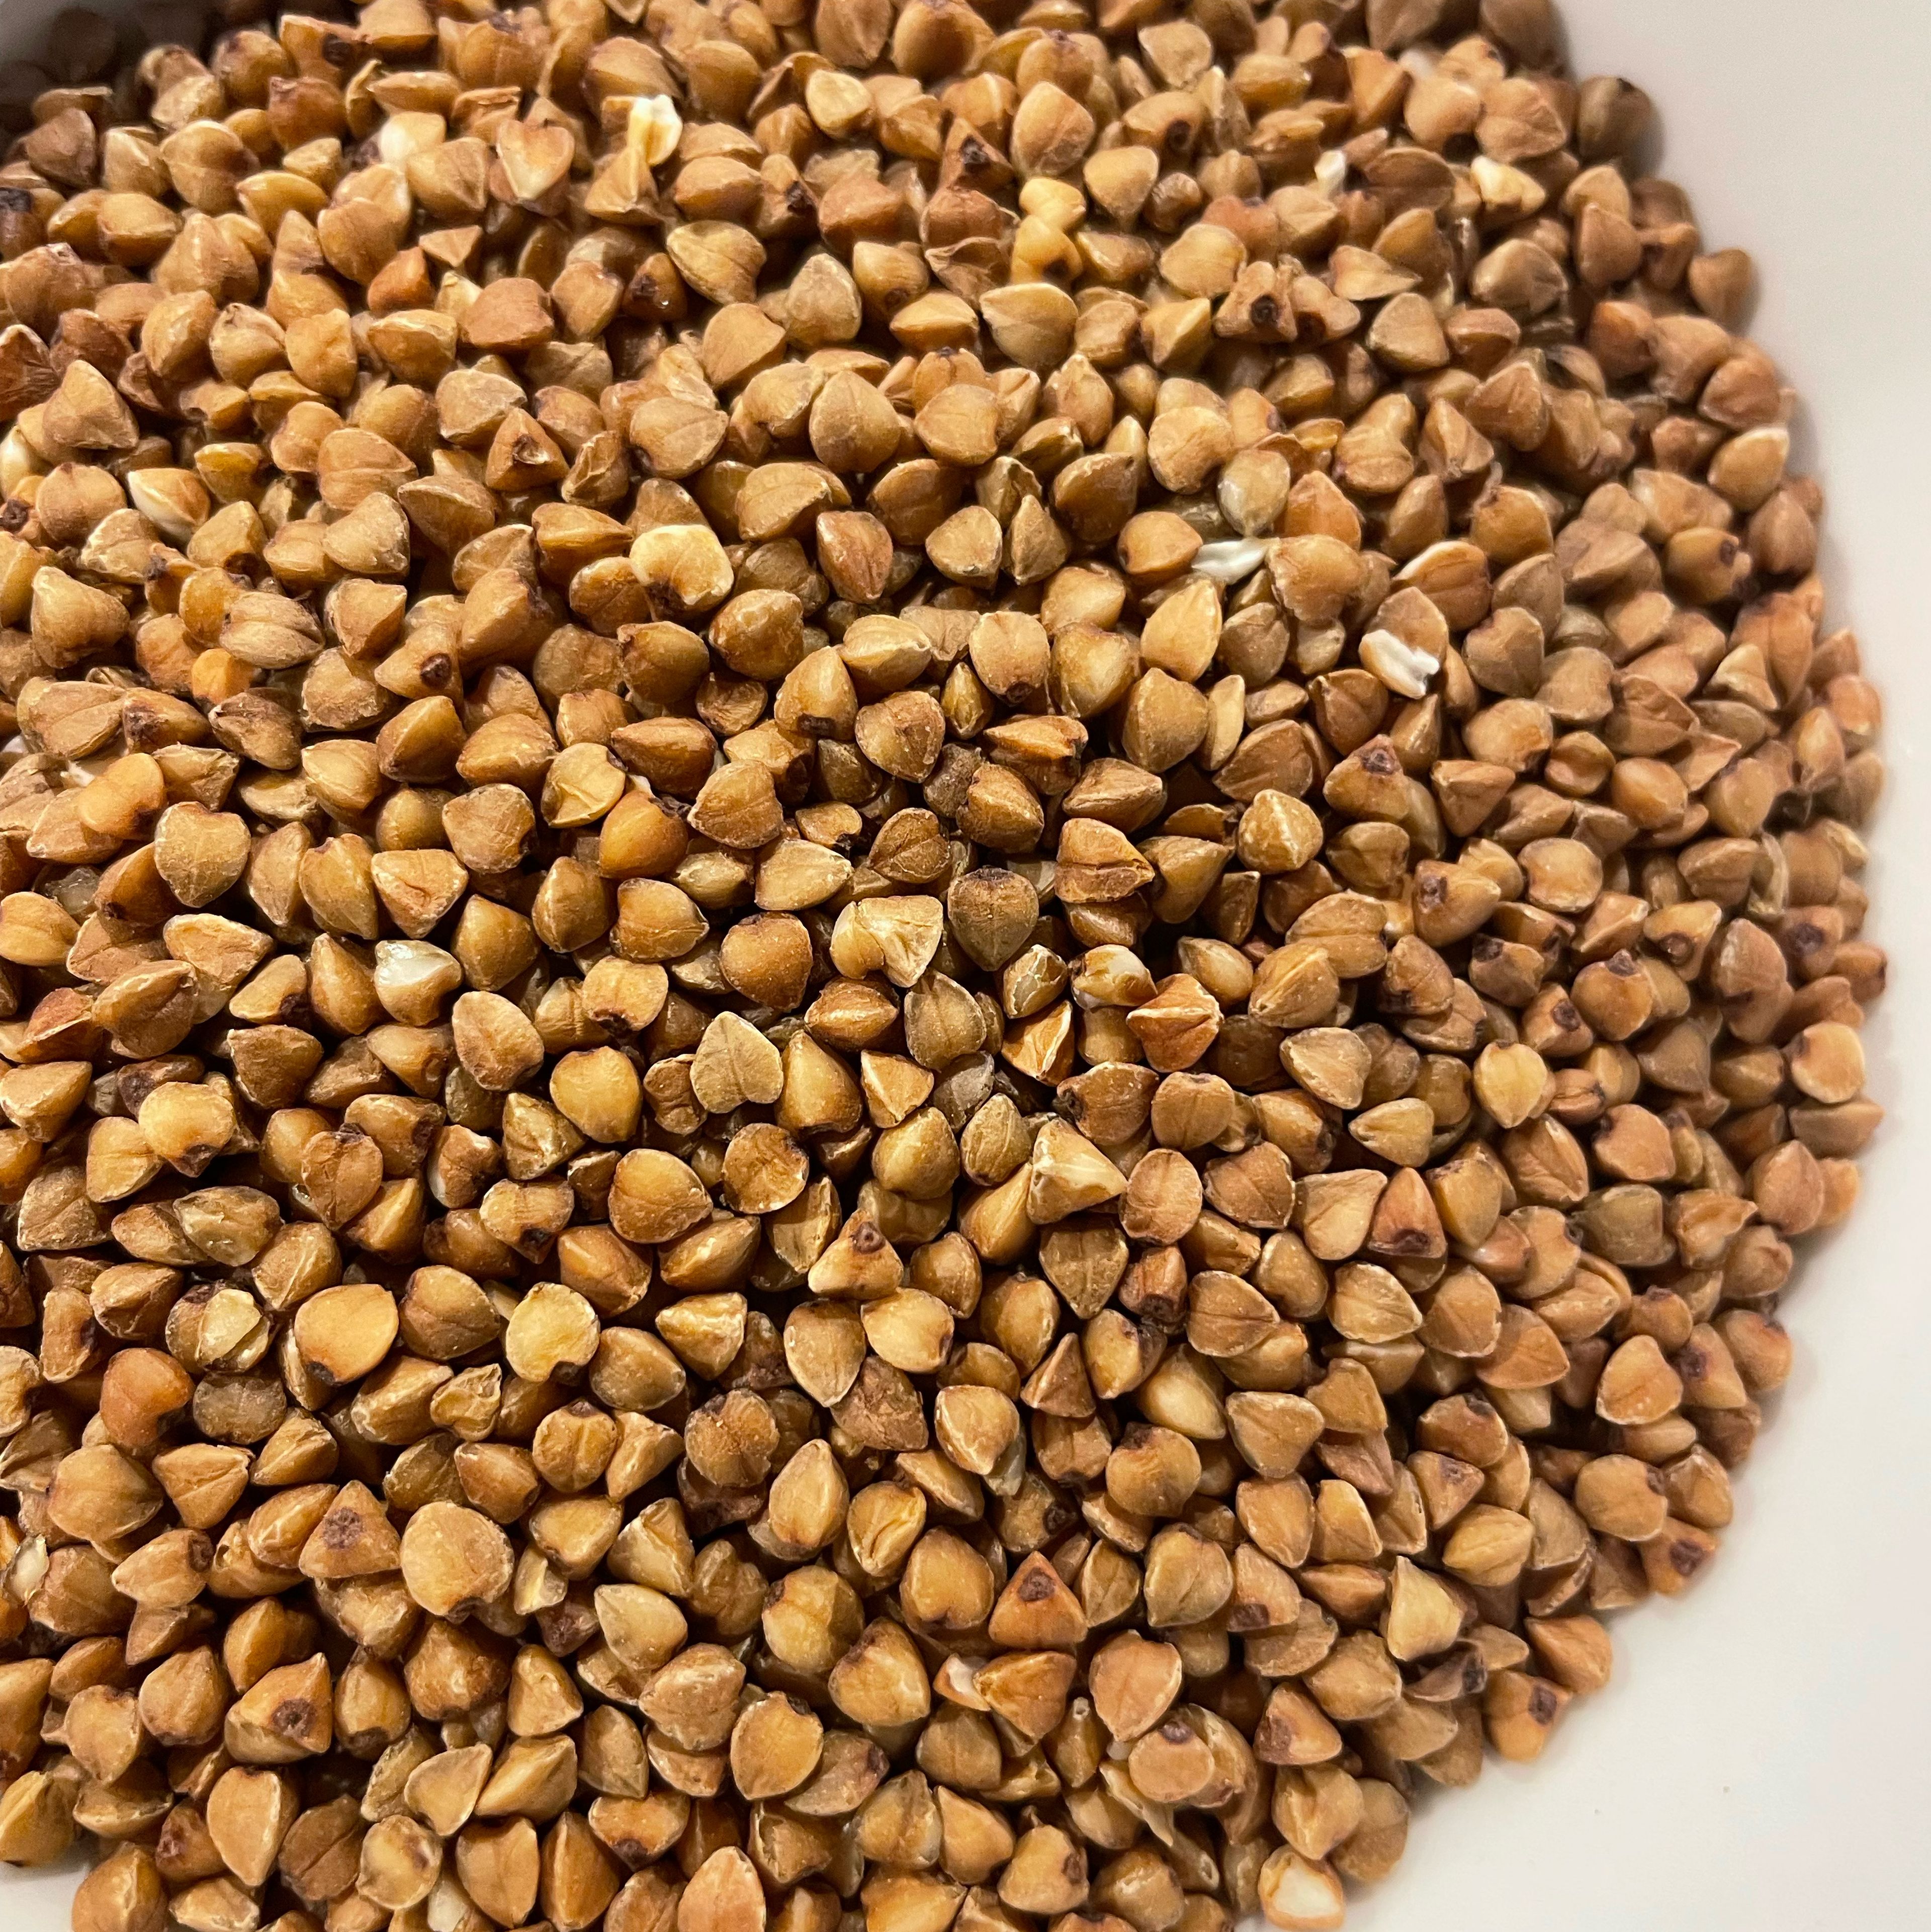 While the hearts are cooking, prepare the buckwheat. Rinse your buckwheat to remove any debris.